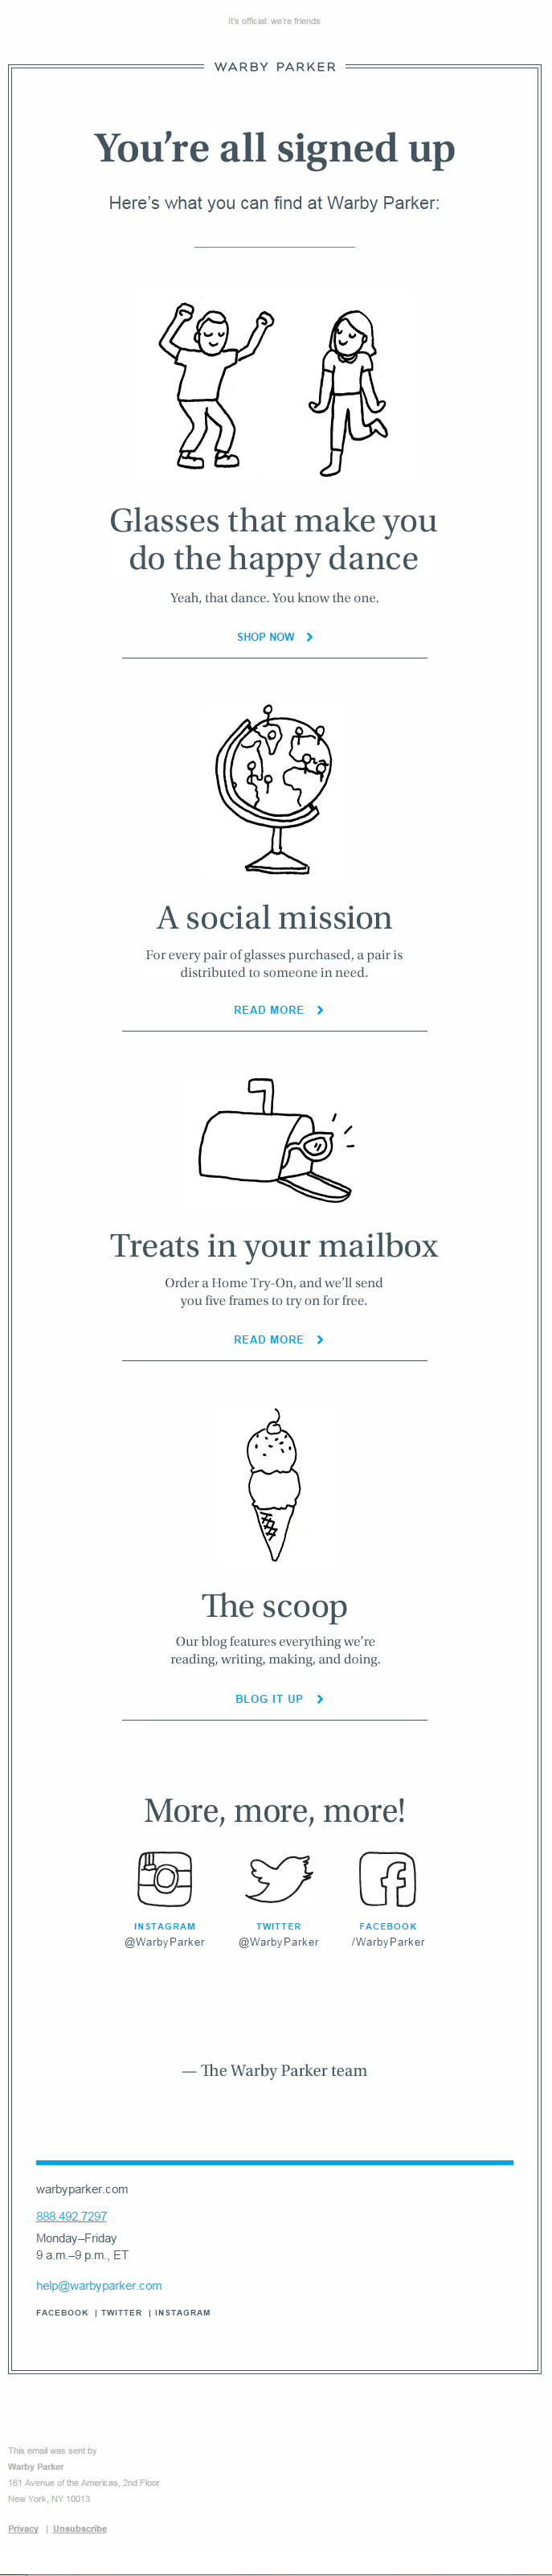 Warby Parker welcome email